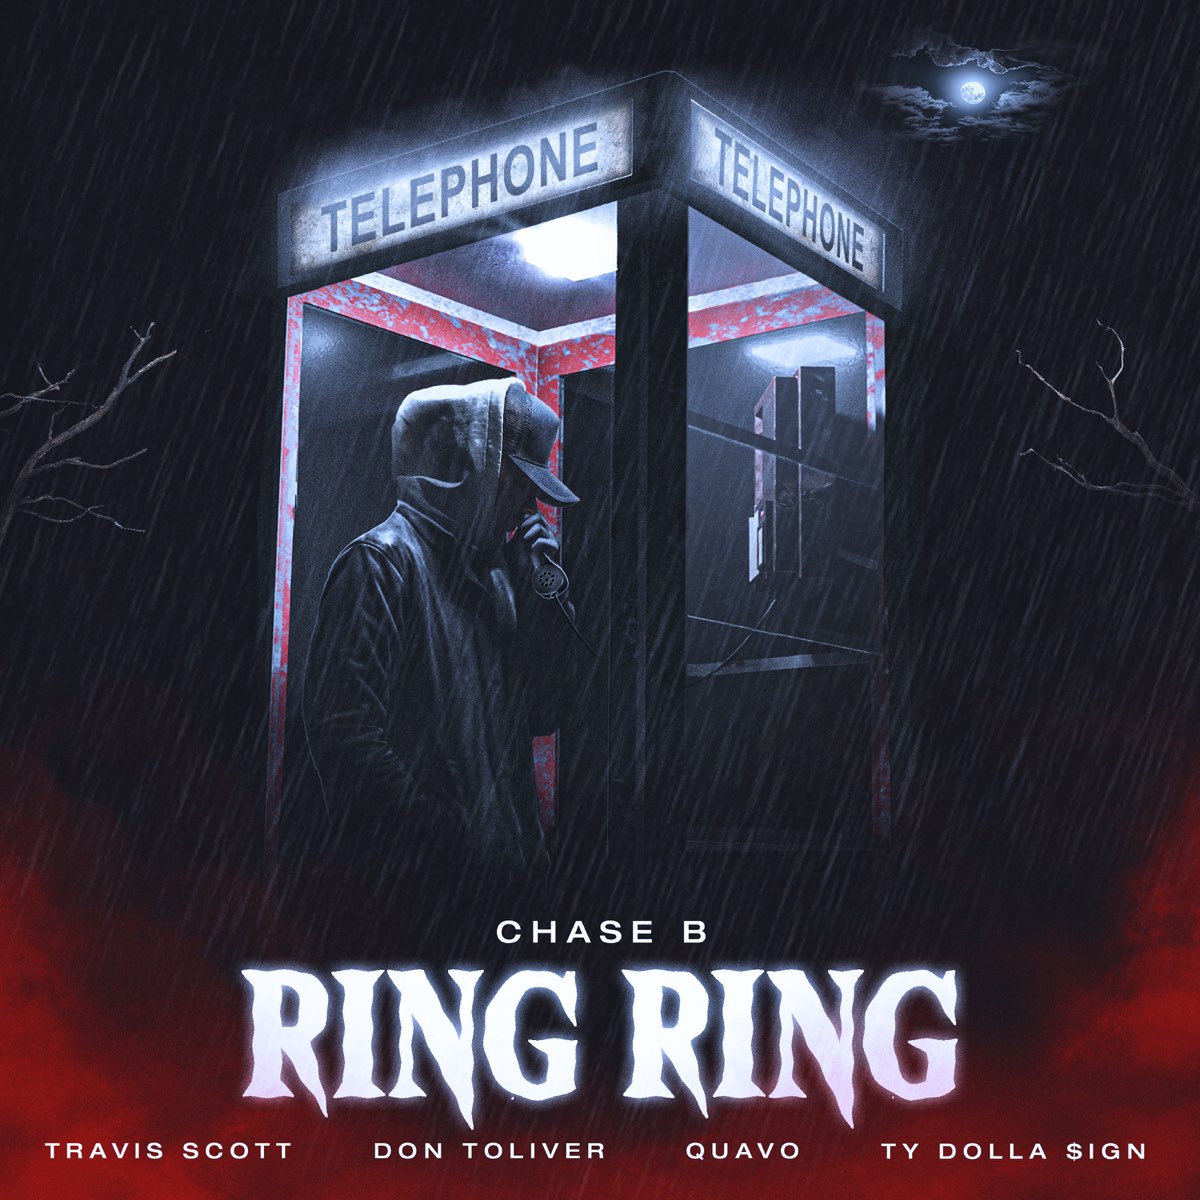 Ring Ring (feat. Don Toliver, Quavo & Ty Dolla $ign) - Single by CHASE B &  Travis Scott on Apple Music